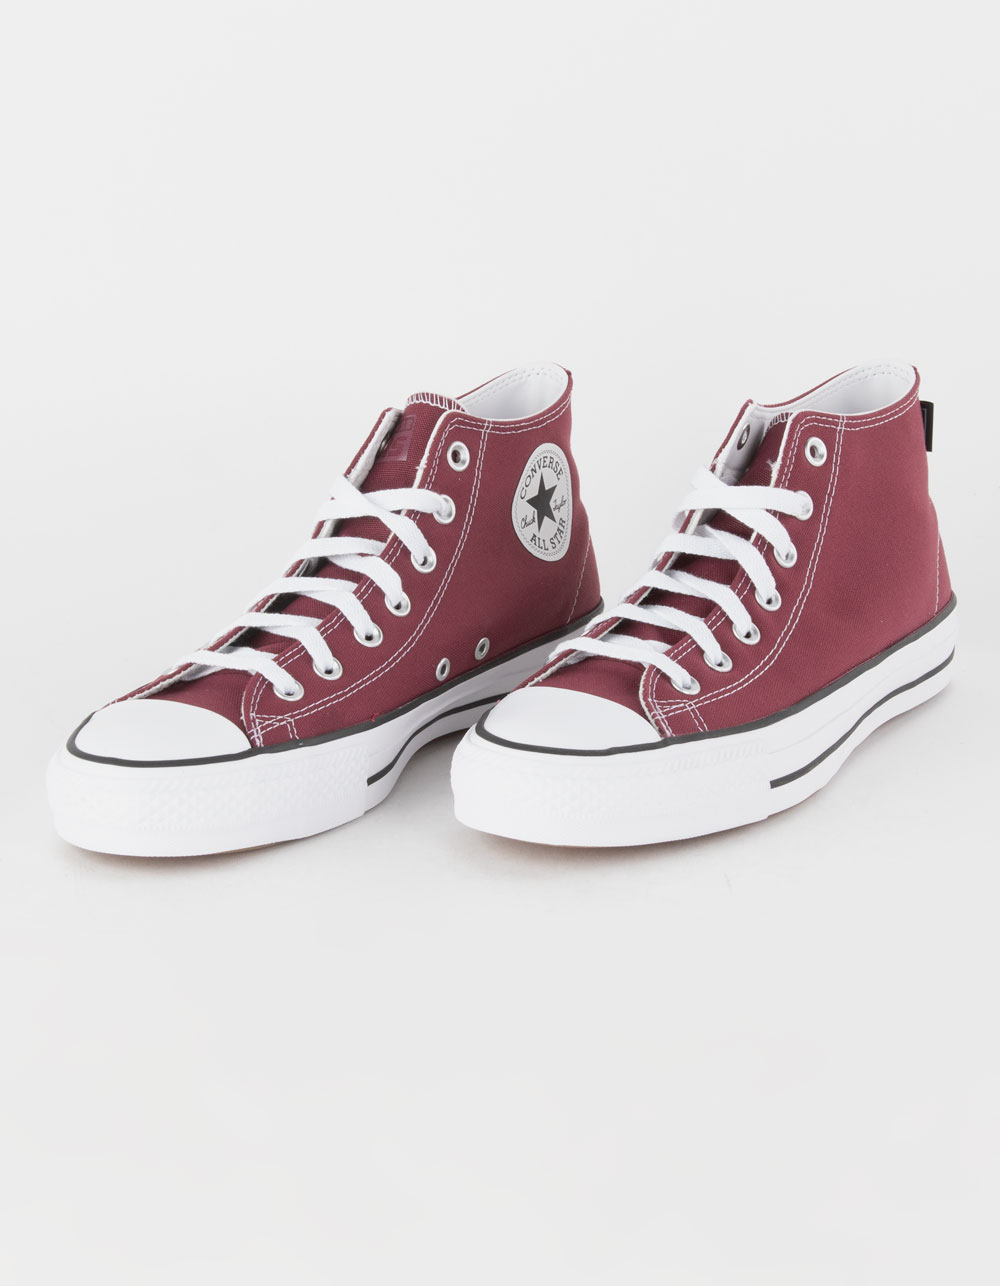 CONVERSE Chuck Taylor All Star Pro Mens Skate Shoes - CHERRY | Tillys